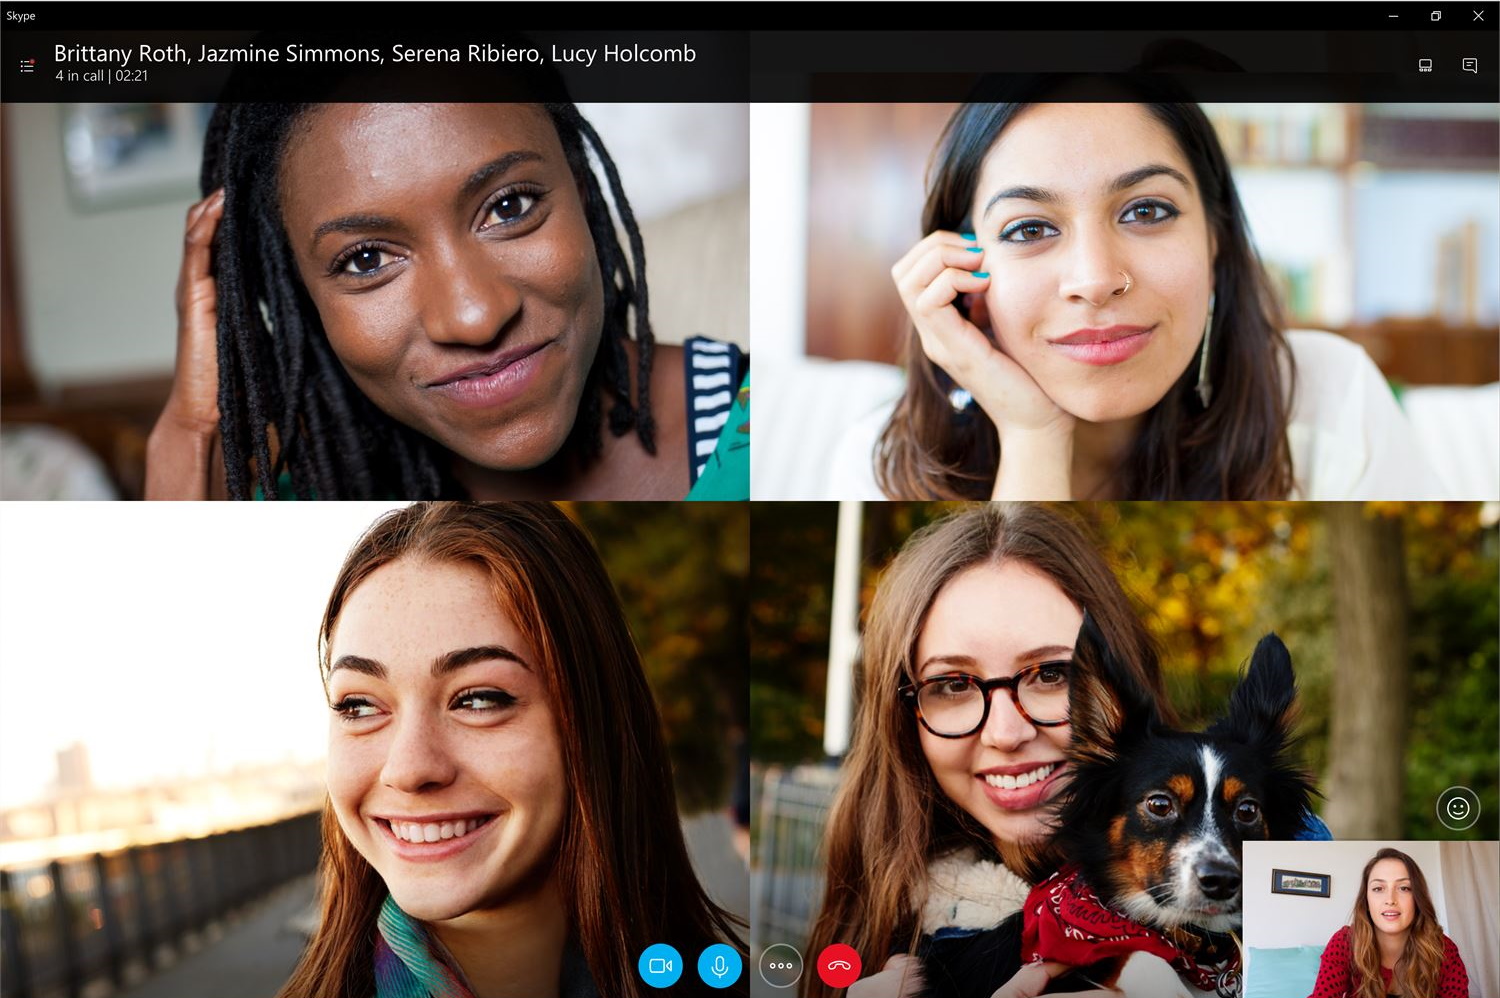 The best video chat apps to turn social distancing into distant socializing  | TechCrunch